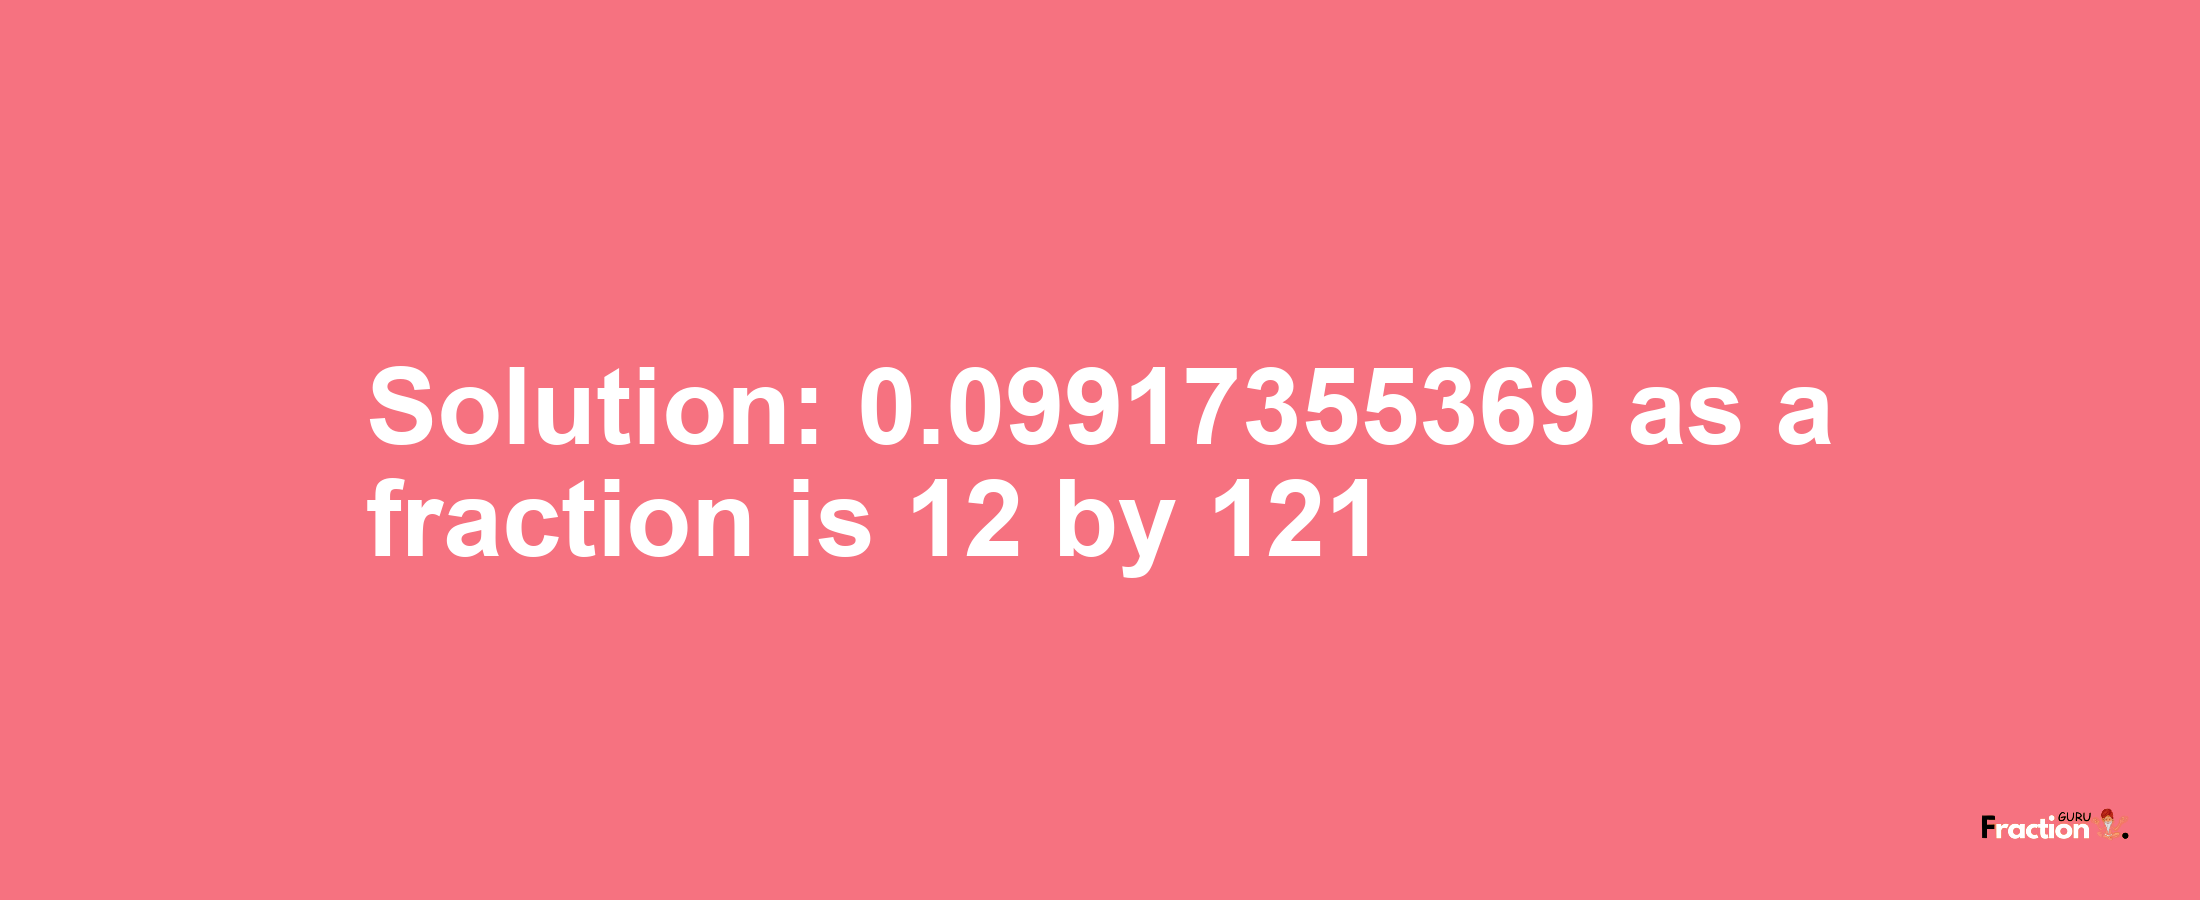 Solution:0.09917355369 as a fraction is 12/121